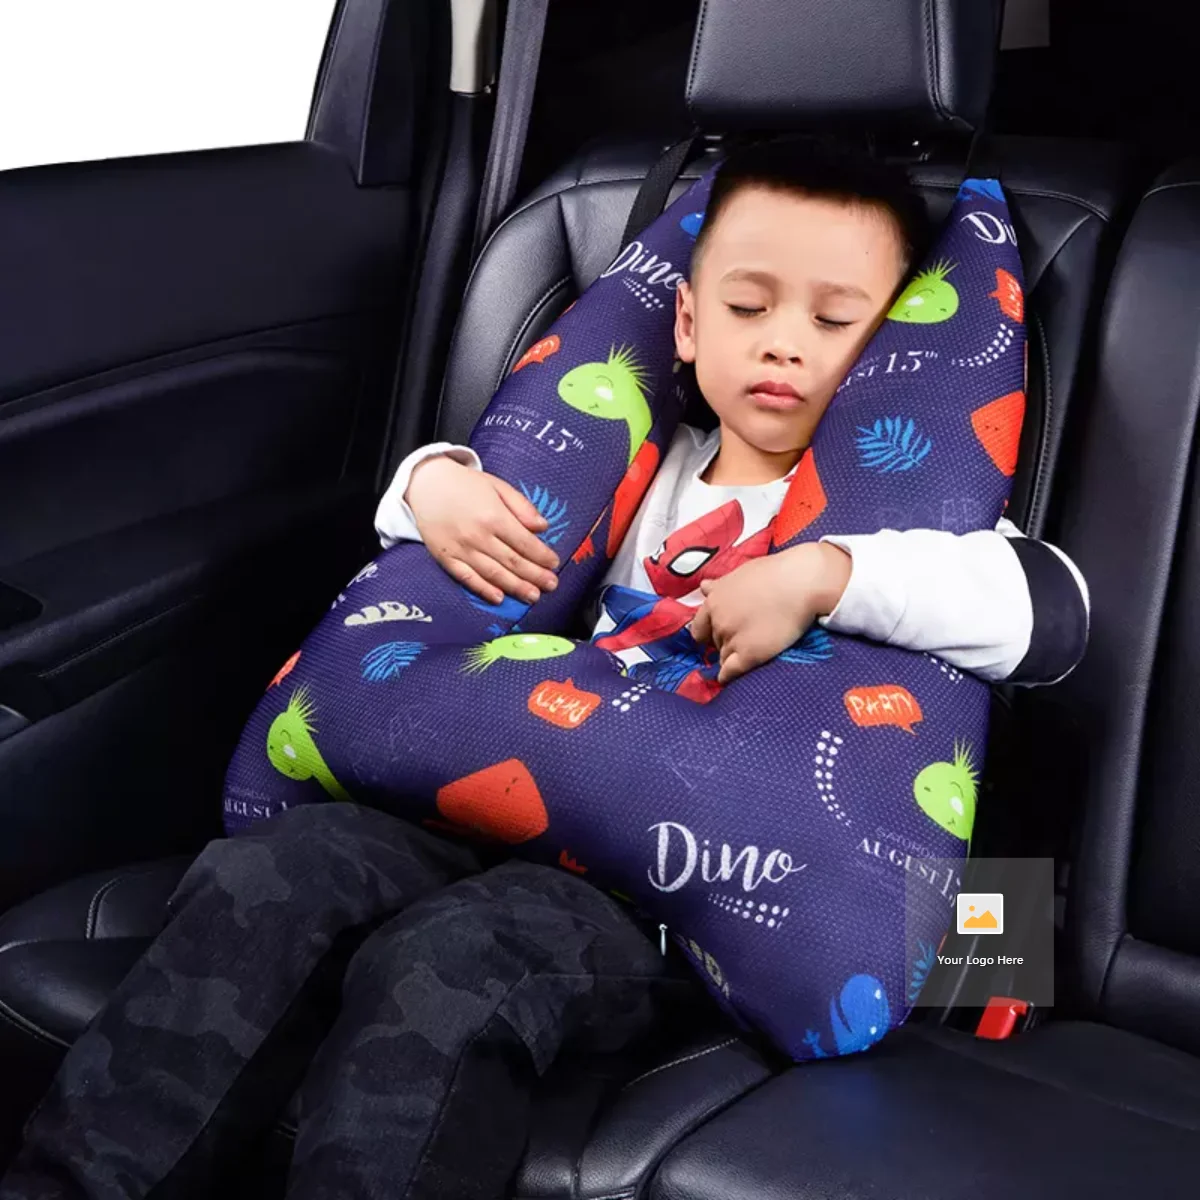 Baby Children Safety Car Seat Cover Shoulder Pad Protection cushion cover Pillow 